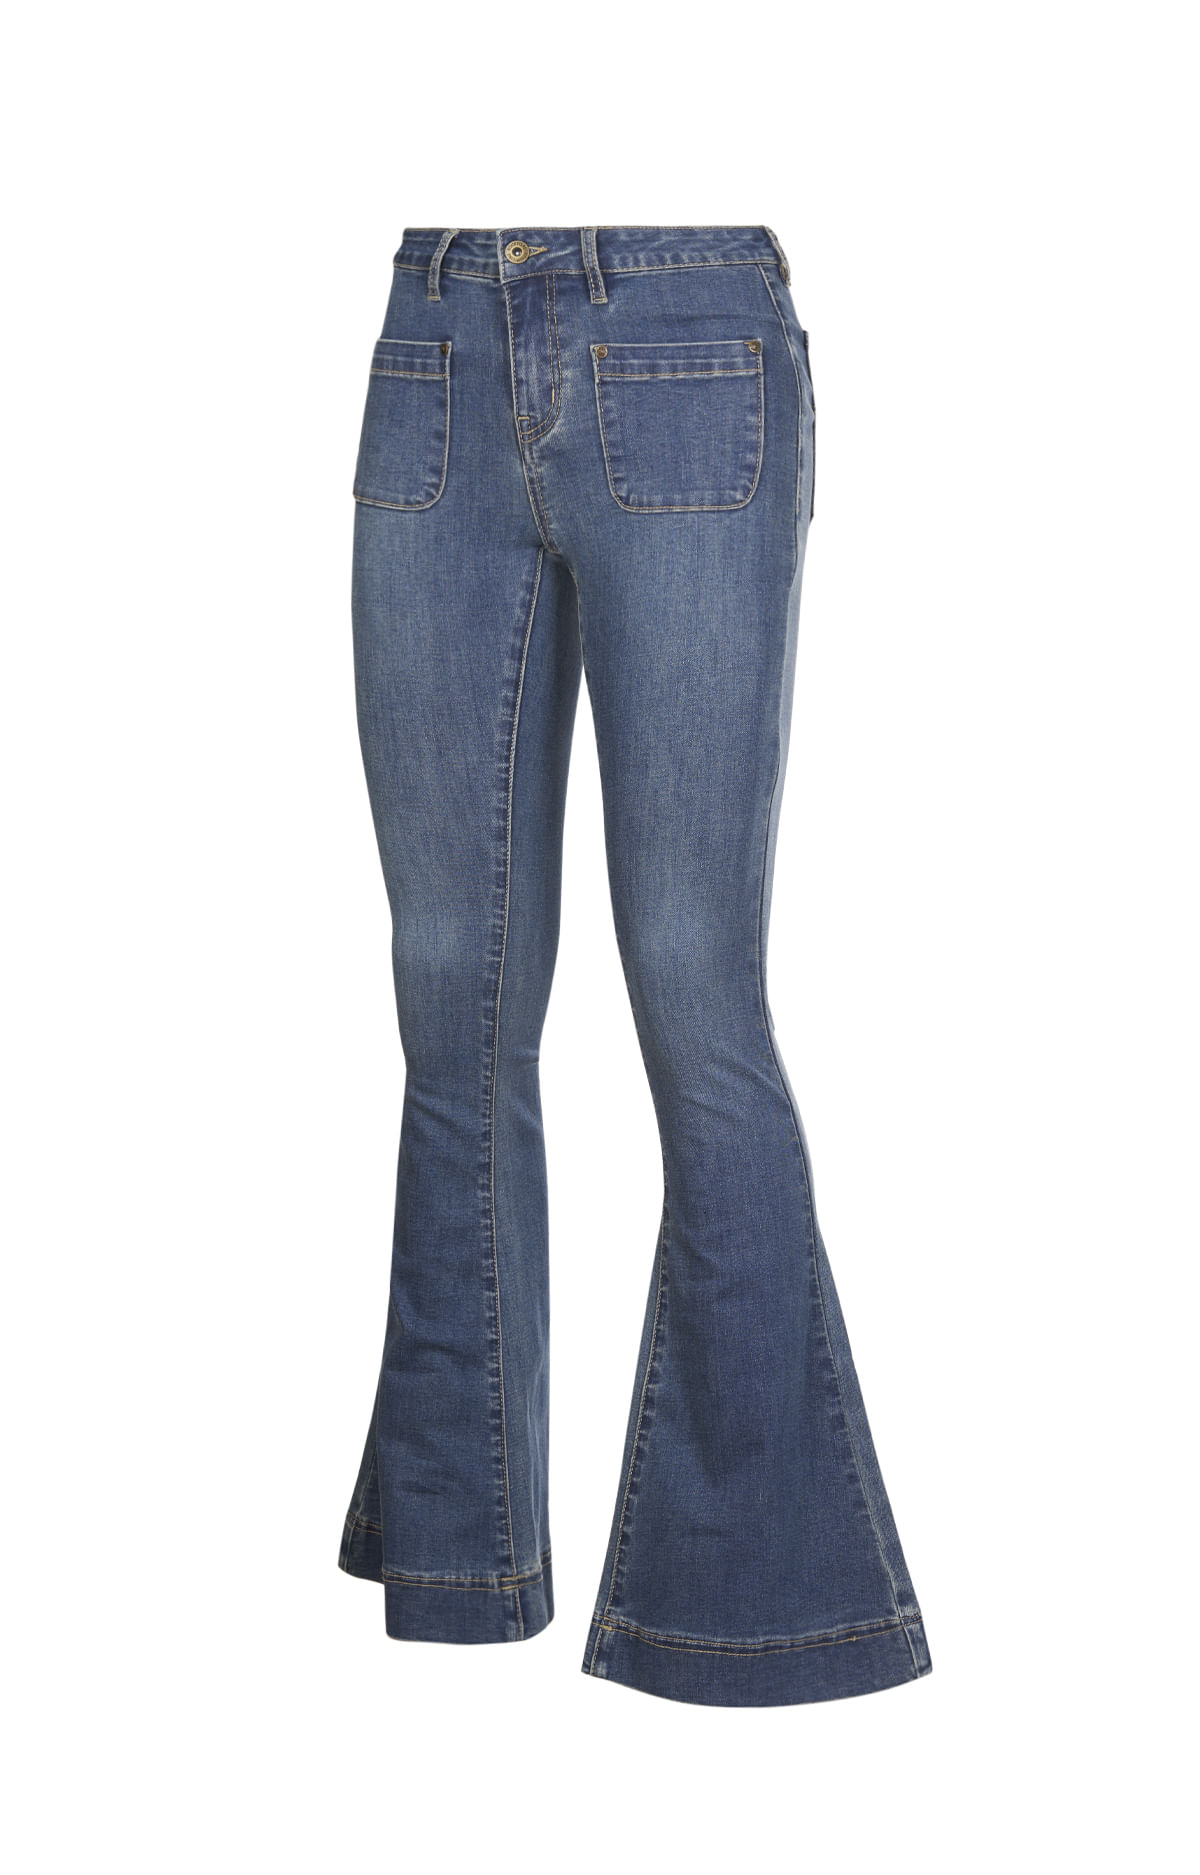 Pantalones y Jeans Mujer - Rockford Chile